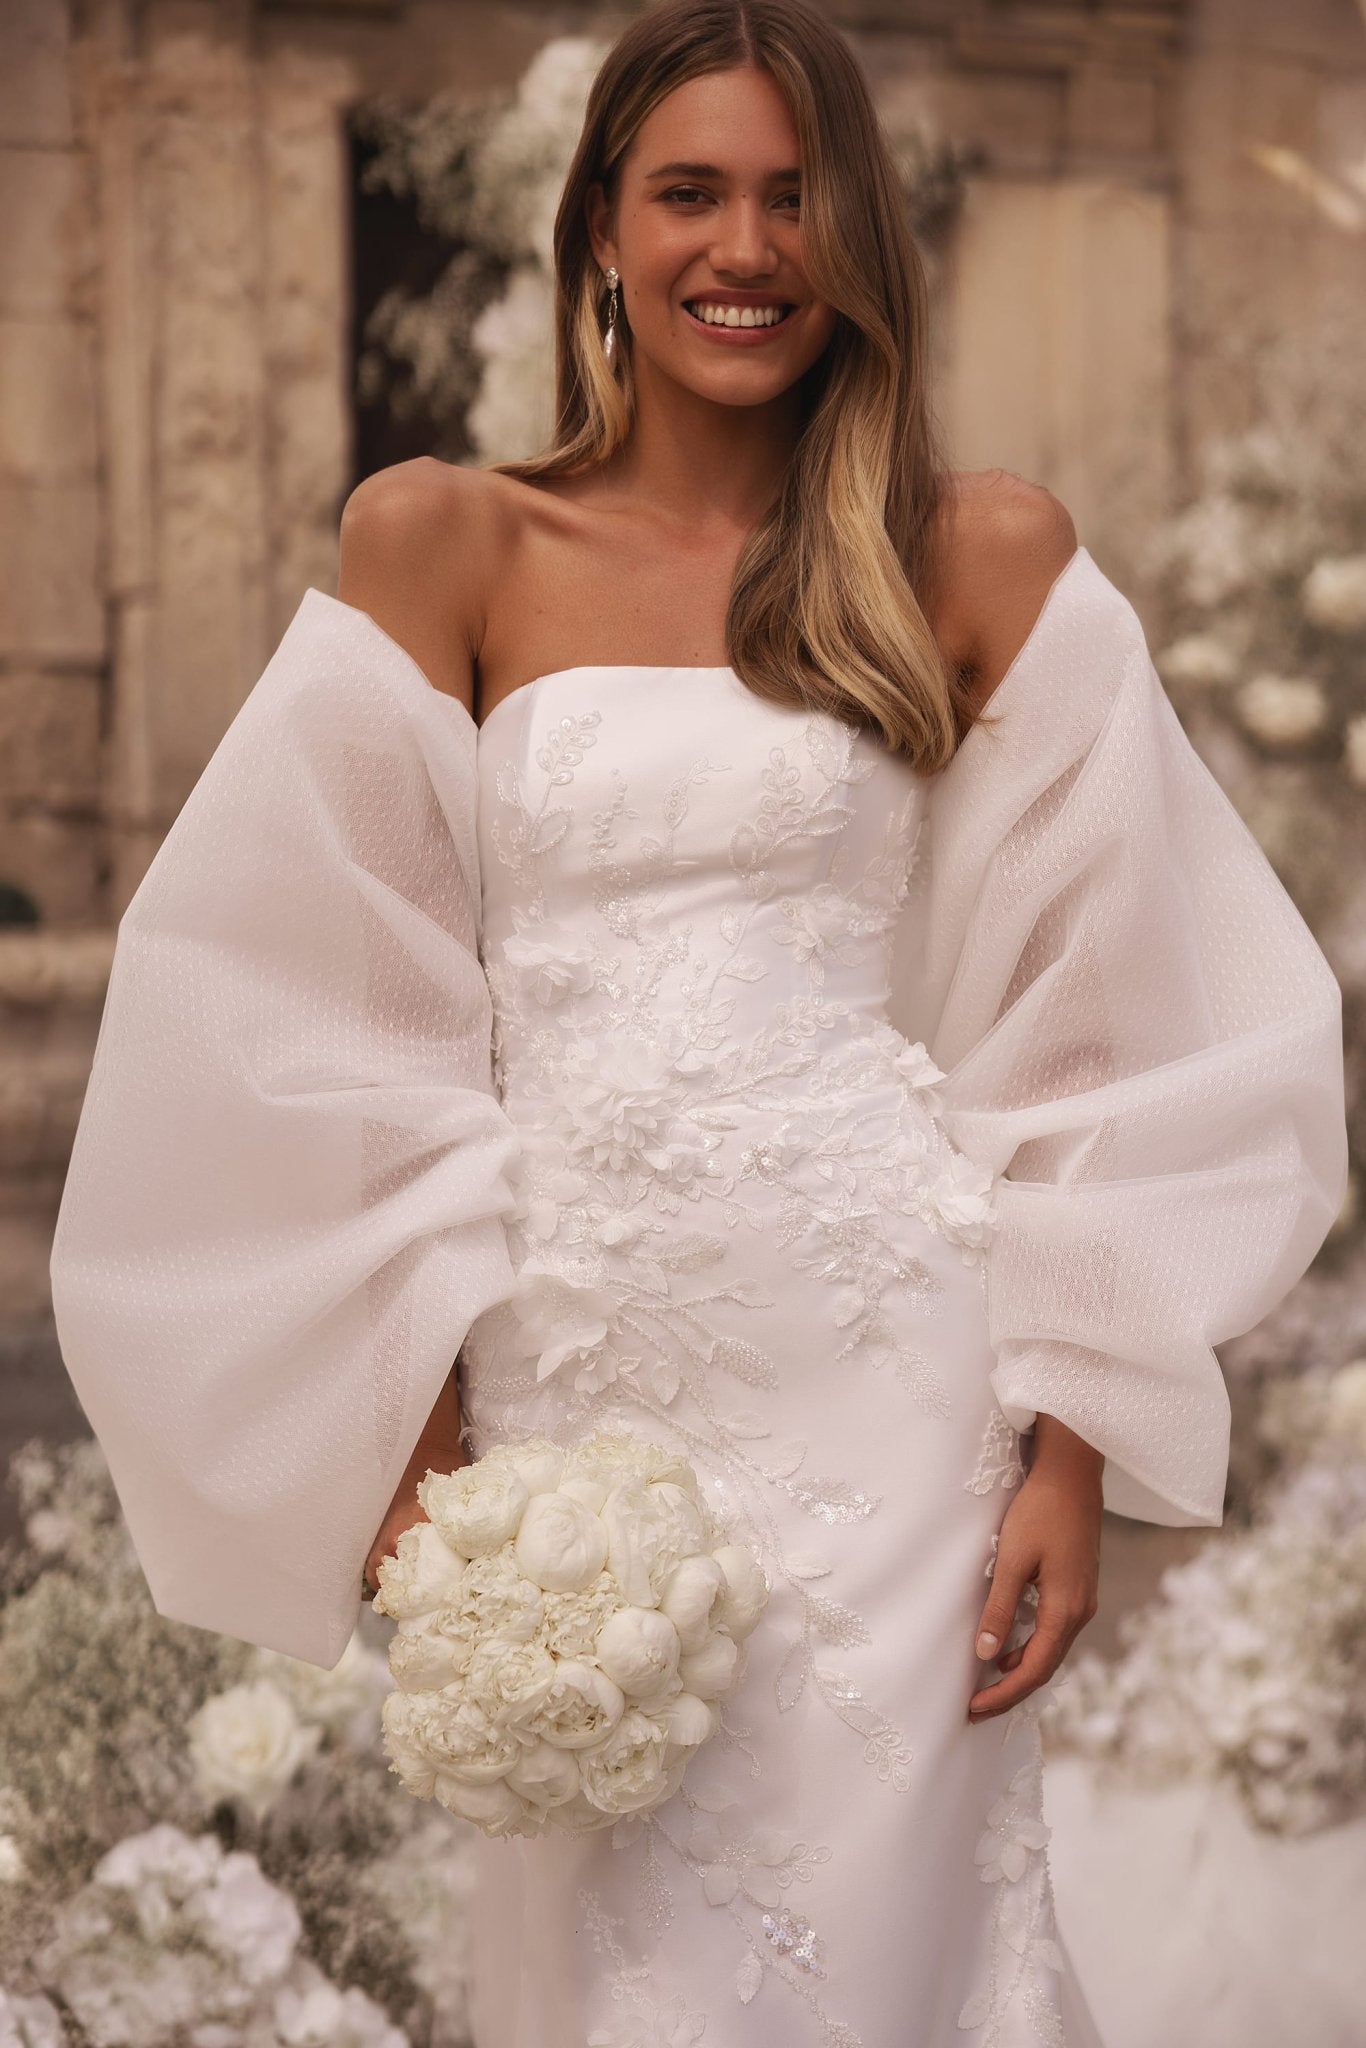 Enchanting Ivory Wedding Dress with Sequined Floral Details Plus Size: Immerse in the Beauty of Elegance - WonderlandByLilian